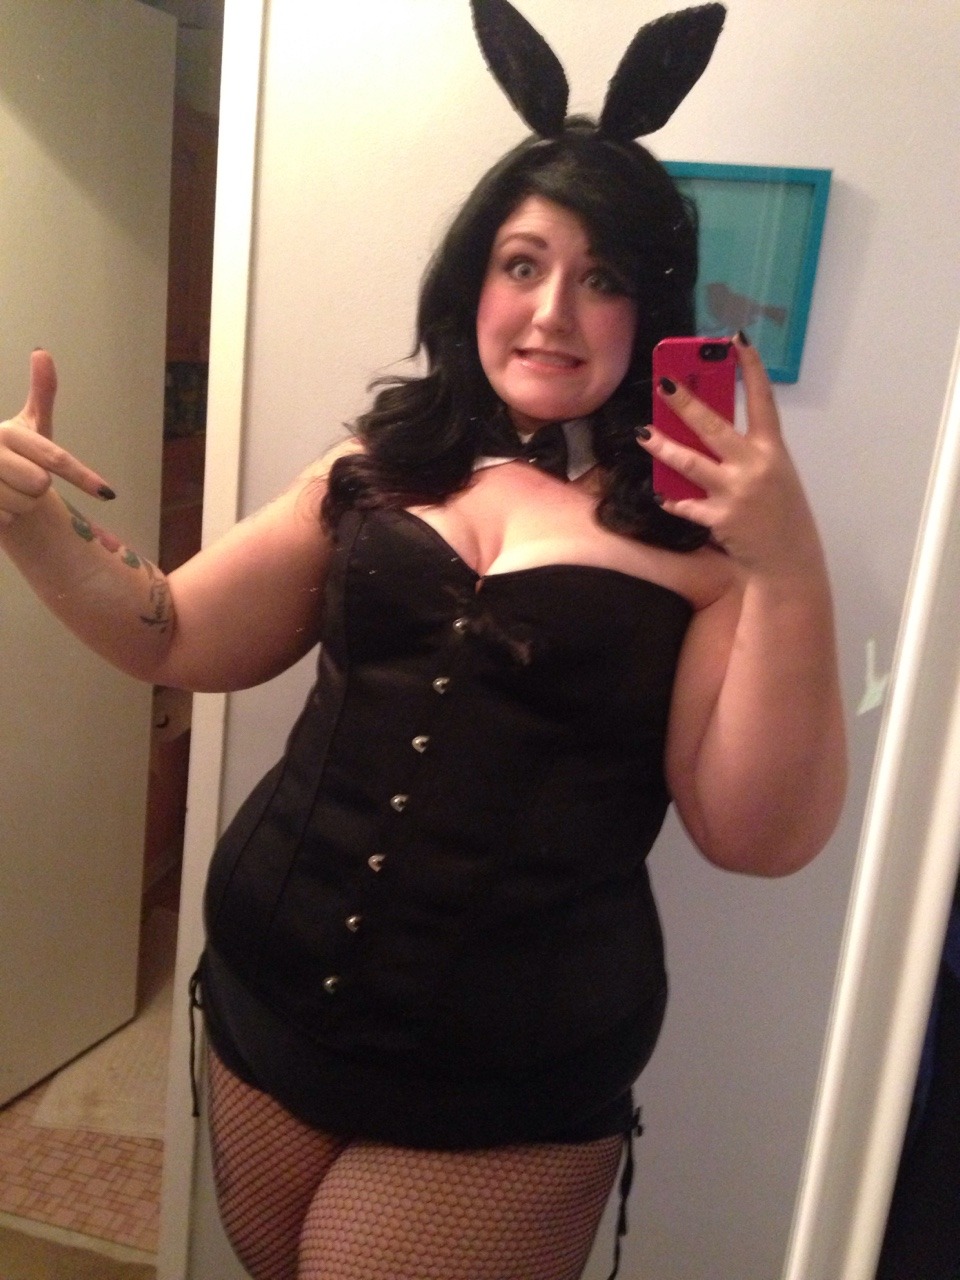 dvrothschild:  No, but really, look at this #fat girl bunnie costume.  My kind of